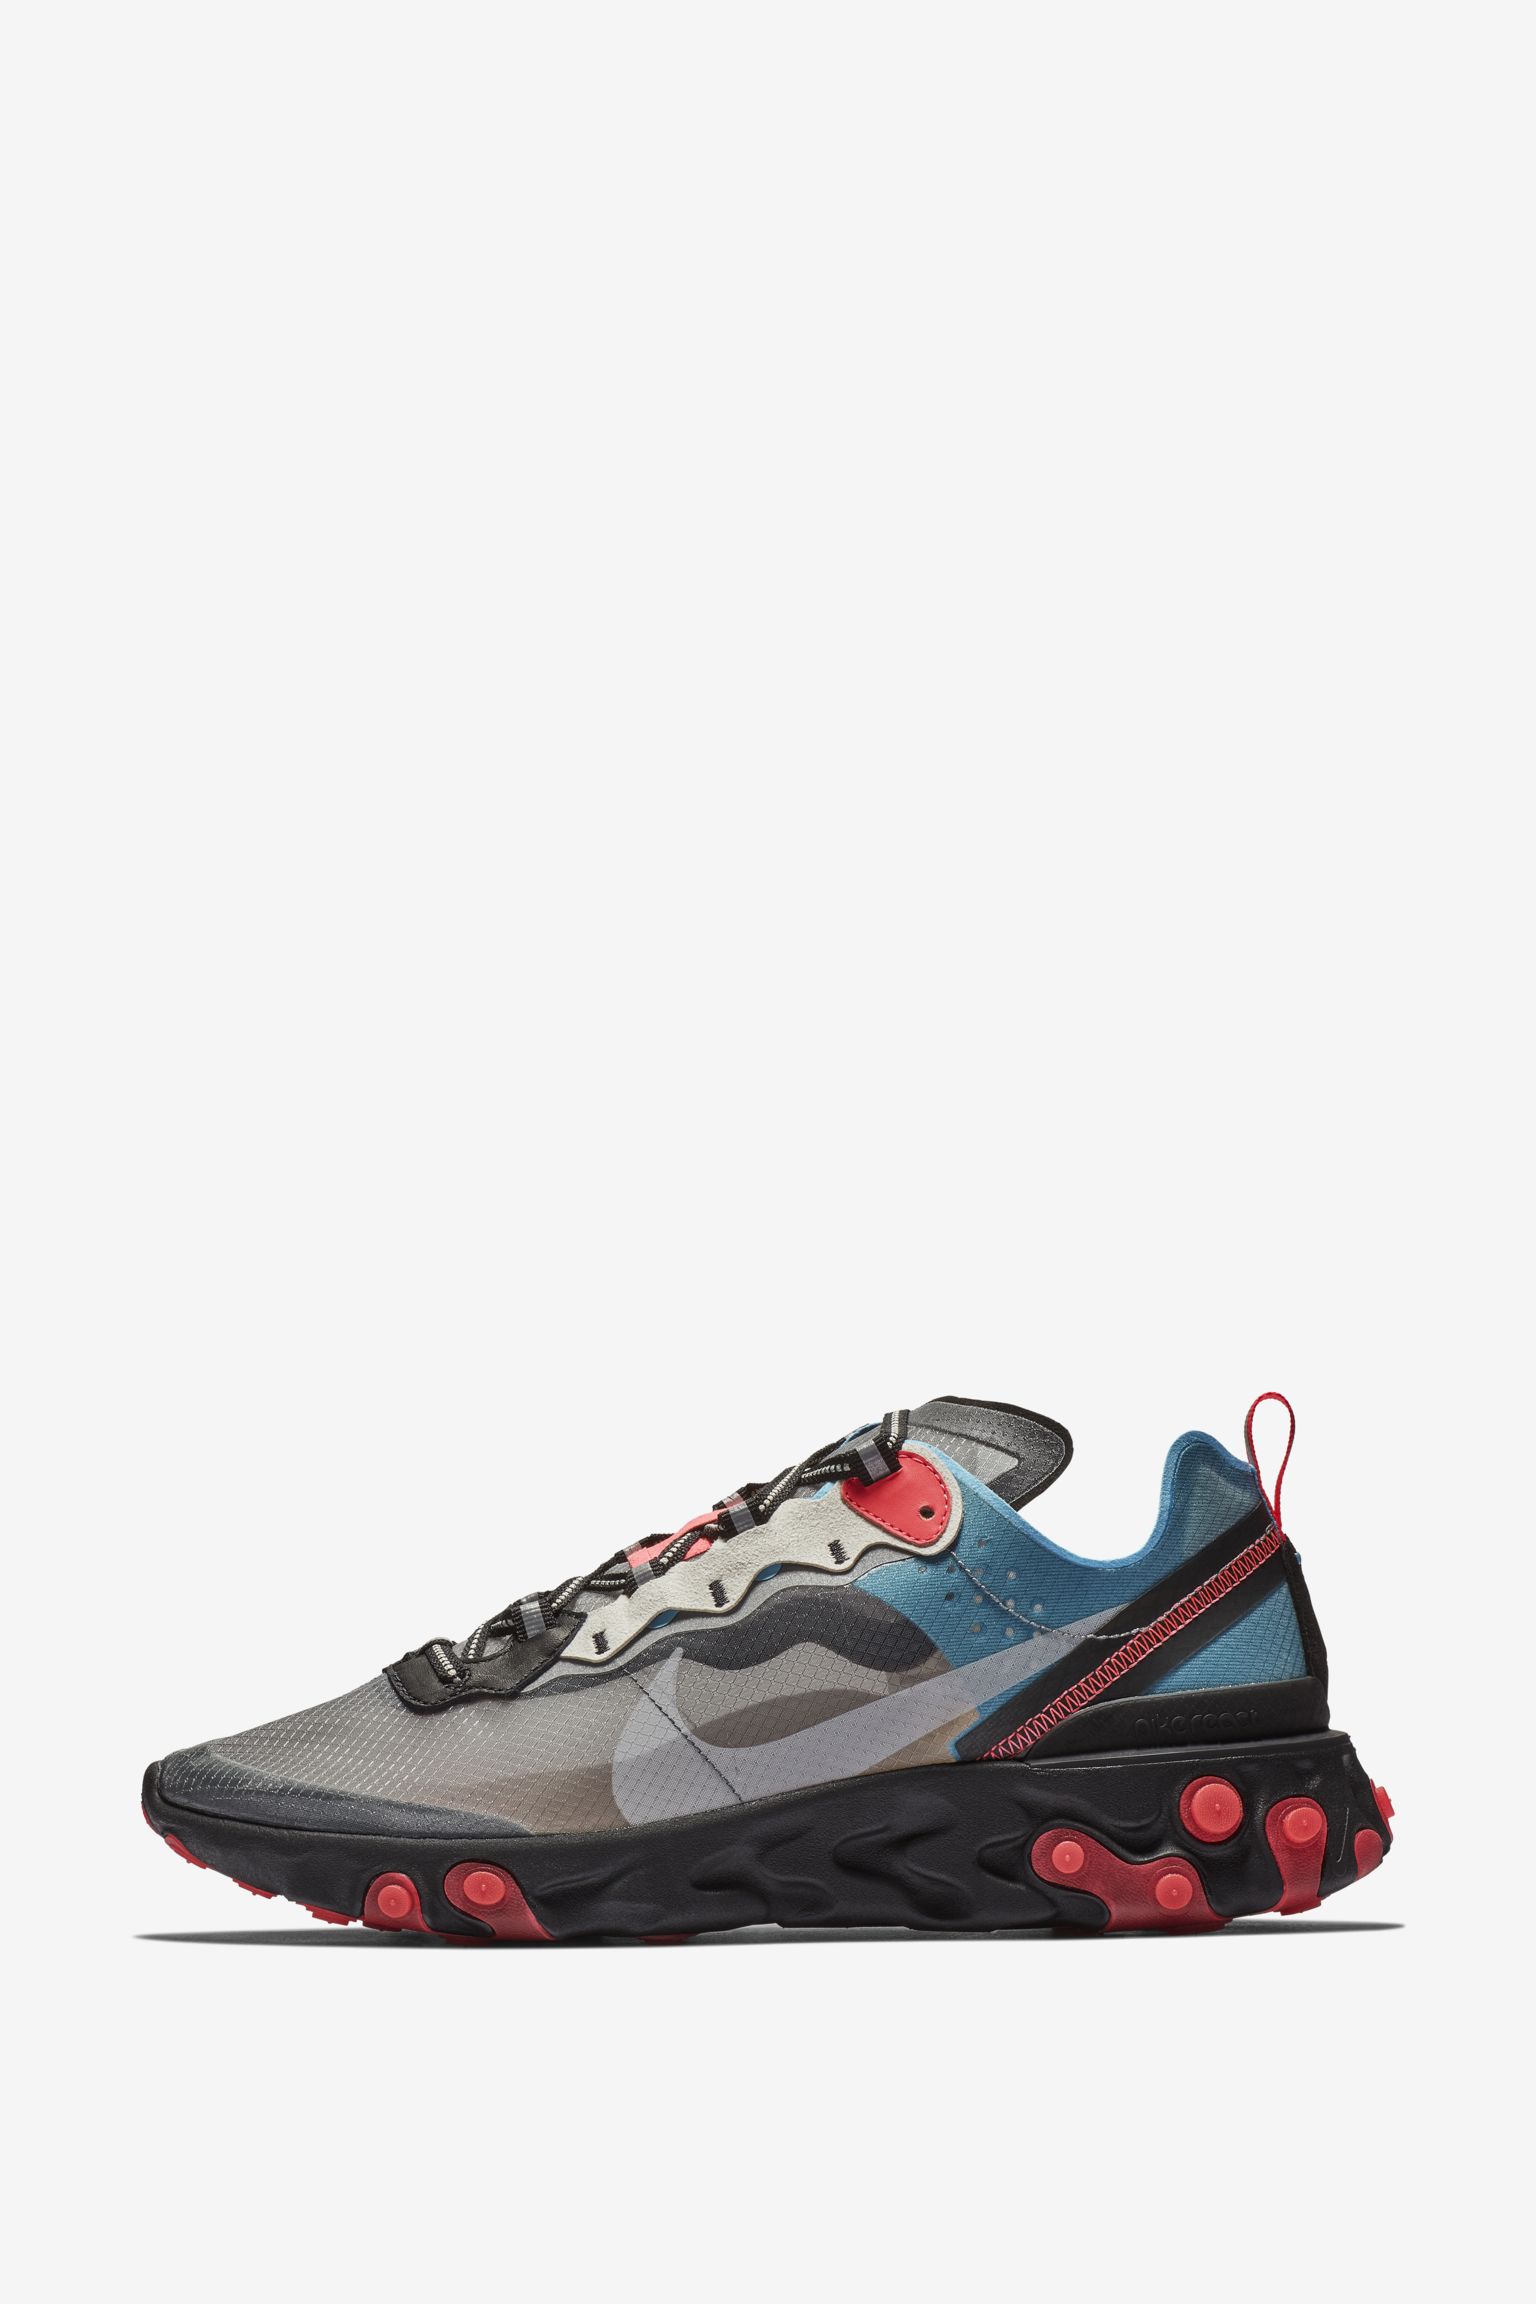 nike react element 87 blue chill